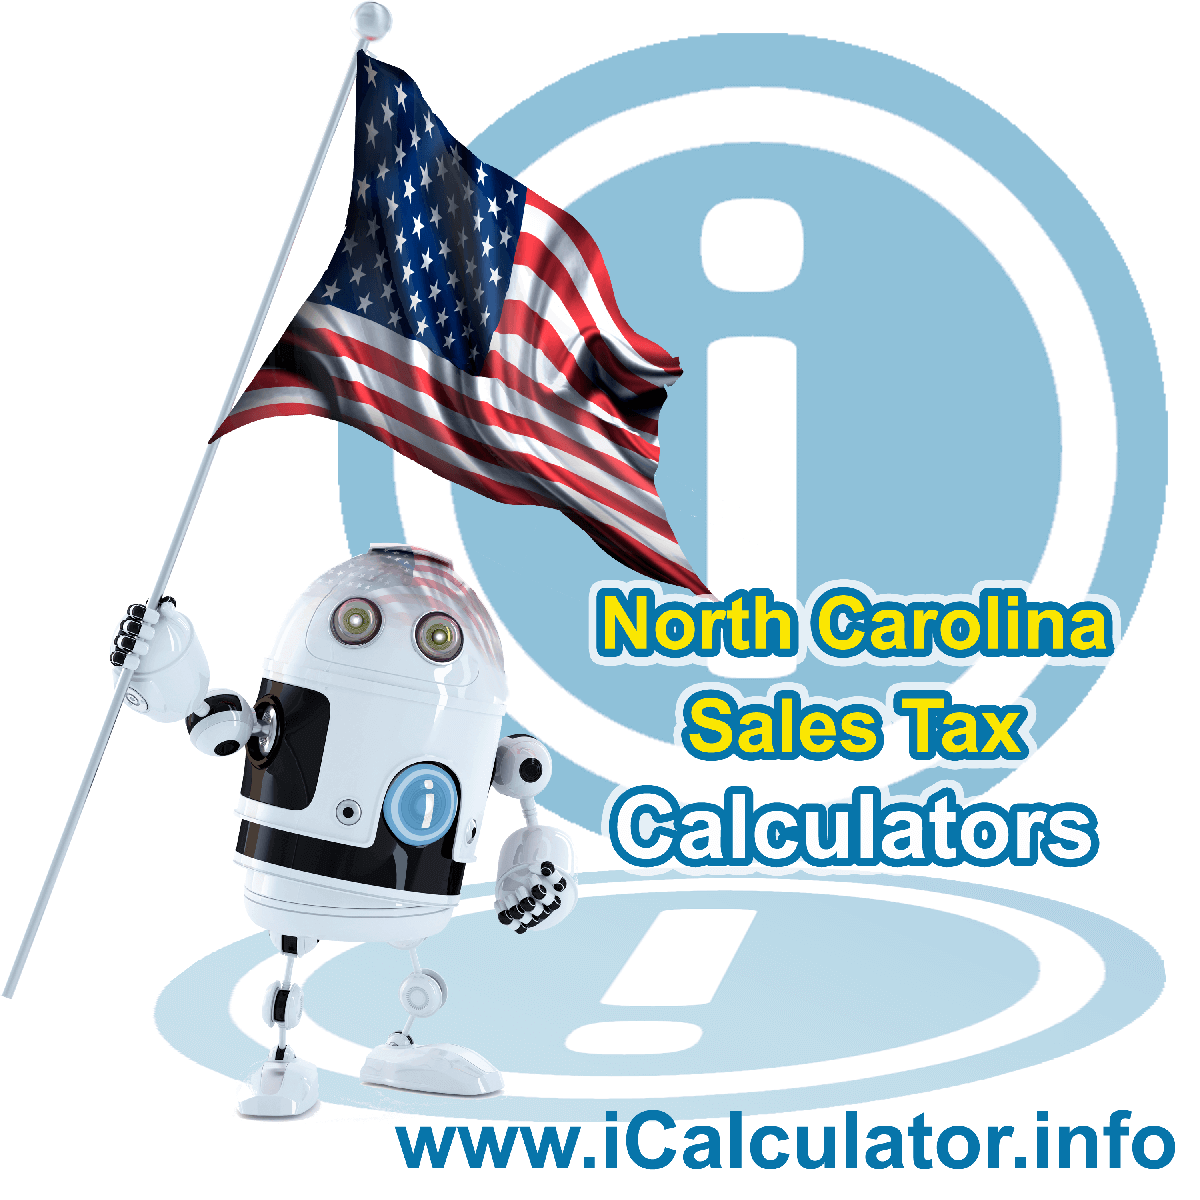 Davidson County Sales Rates: This image illustrates a calculator robot calculating Davidson County sales tax manually using the Davidson County Sales Tax Formula. You can use this information to calculate Davidson County Sales Tax manually or use the Davidson County Sales Tax Calculator to calculate sales tax online.